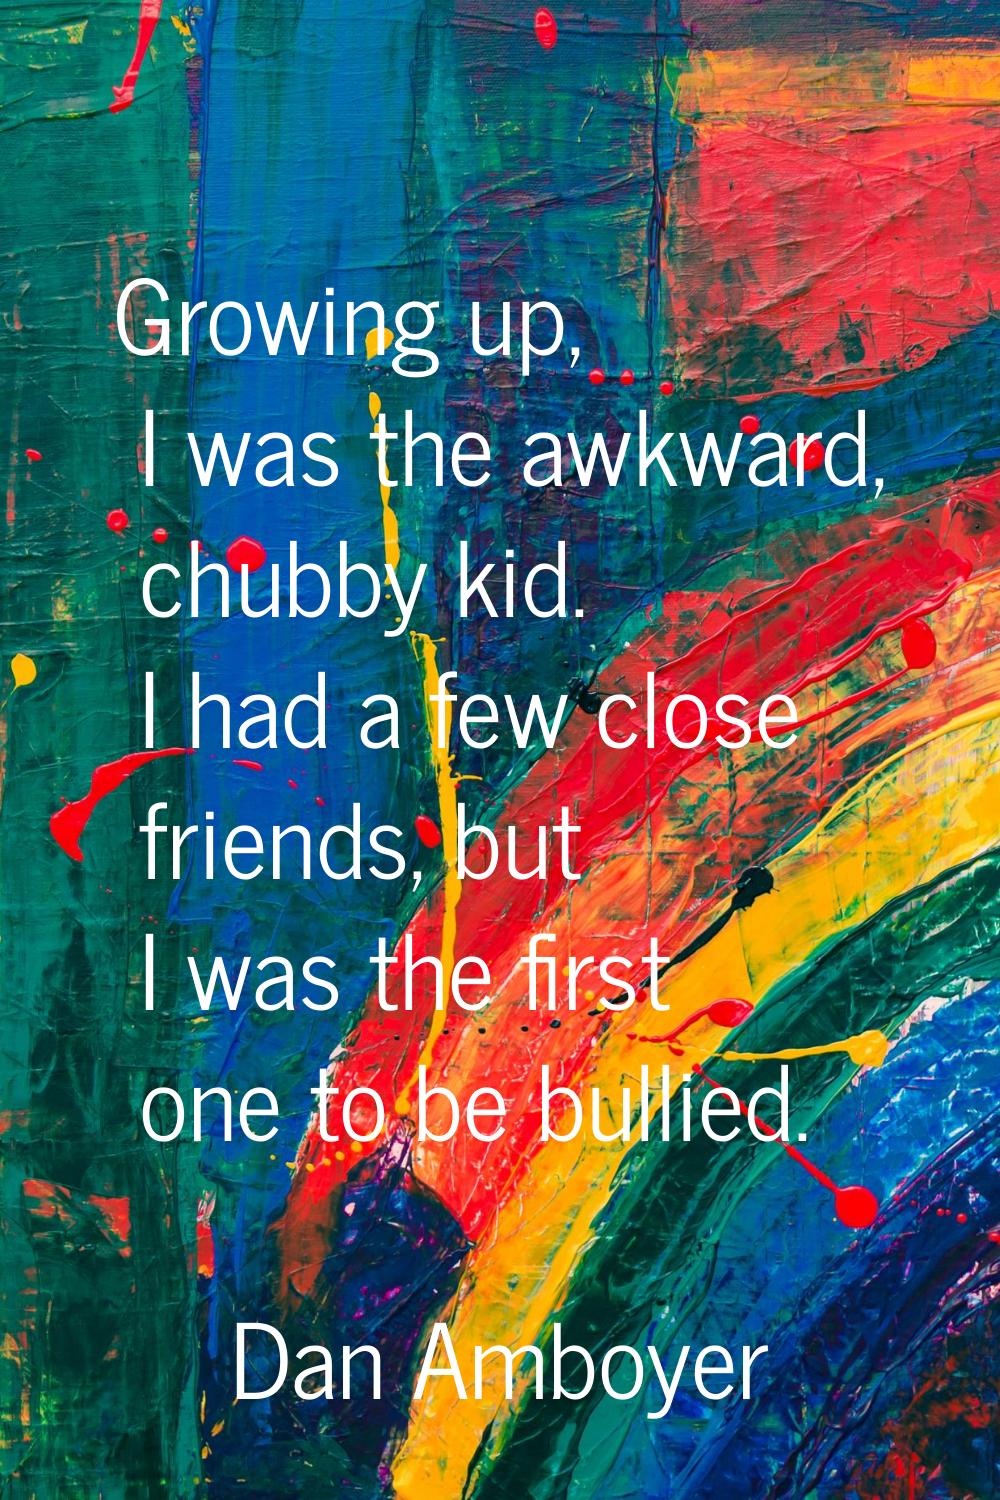 Growing up, I was the awkward, chubby kid. I had a few close friends, but I was the first one to be